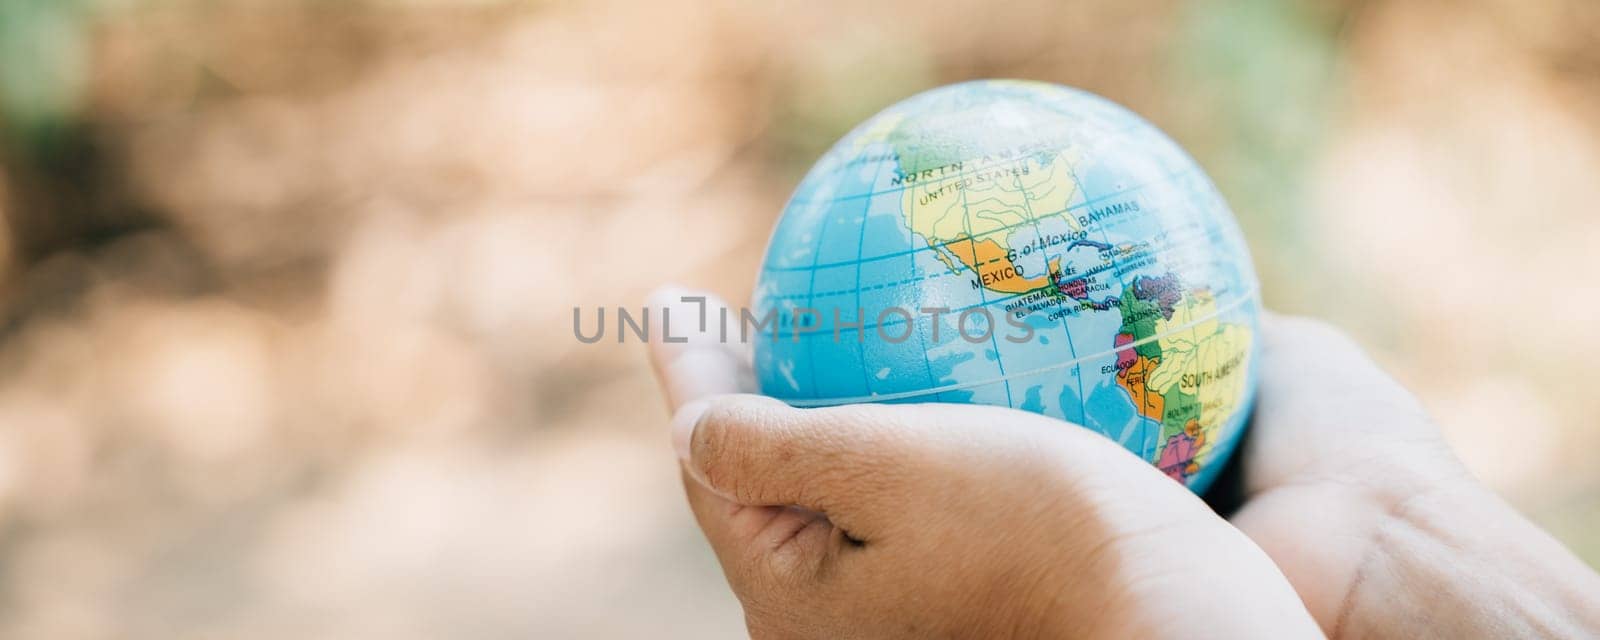 Hold the Green Planet in Your Hands and Save Earth This concept for Environment and Earth Day signifies responsibility, wisdom, and global support for our natural world.